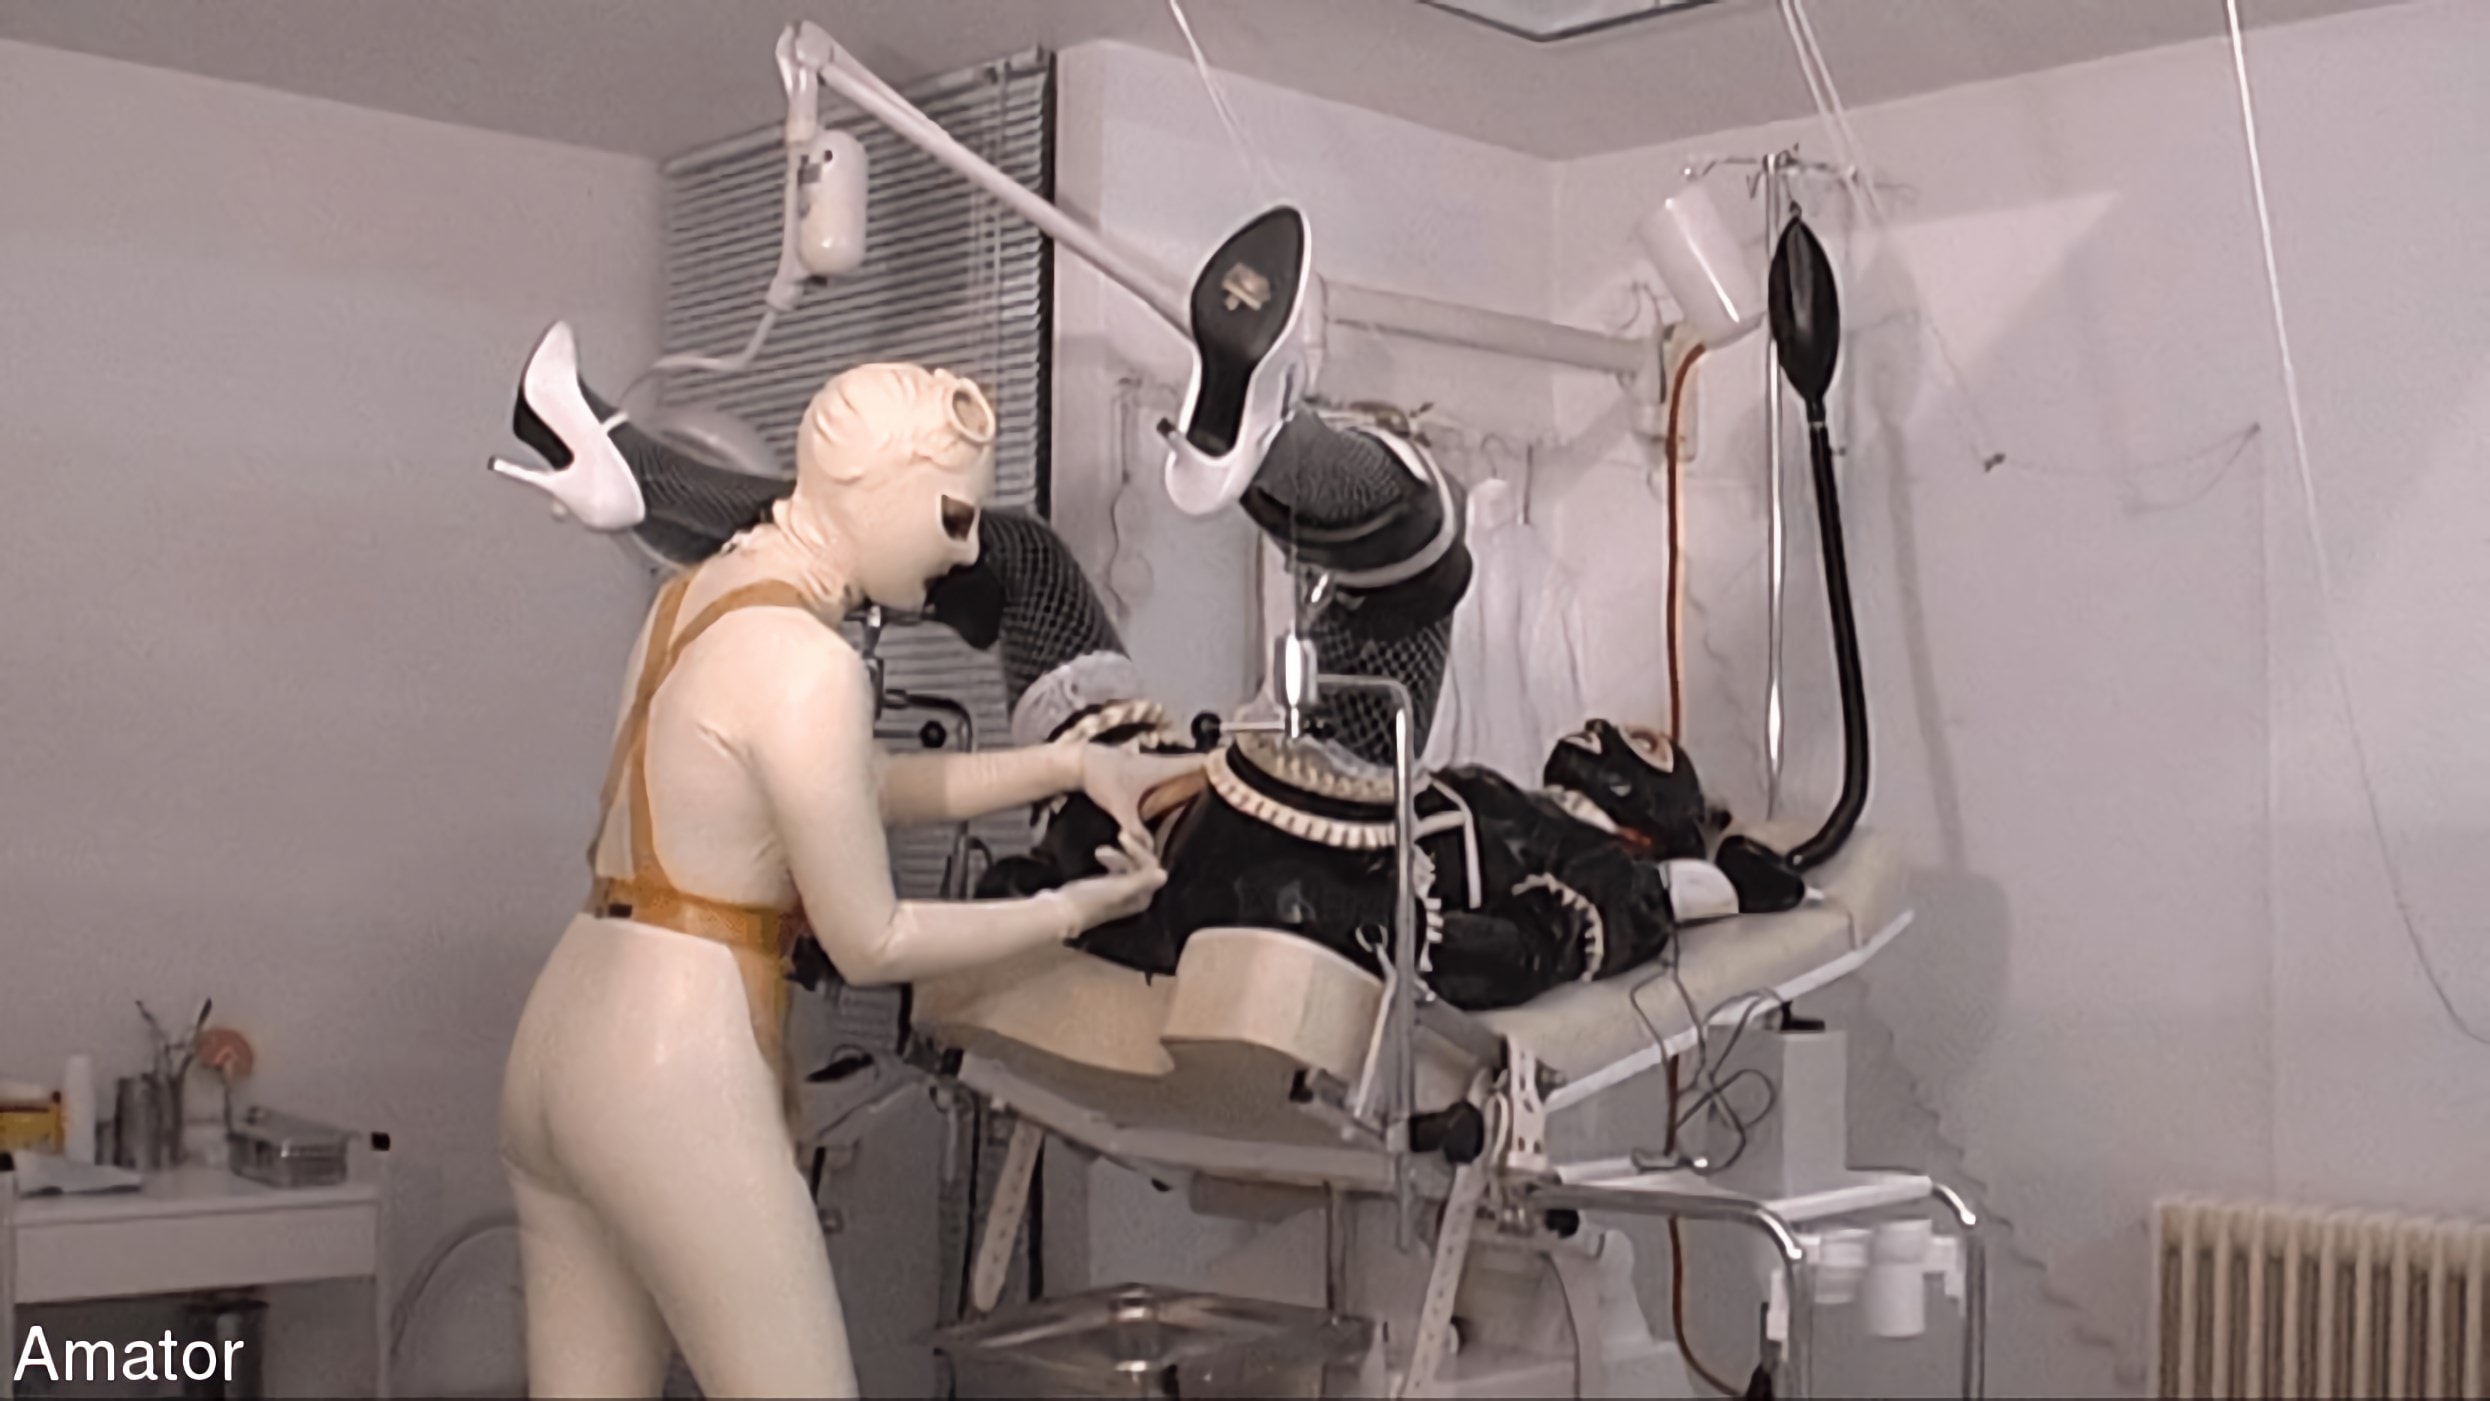 Kink Partners 'The rubber maid in the clinic part 2' starring Madame Zoe (Photo 6)